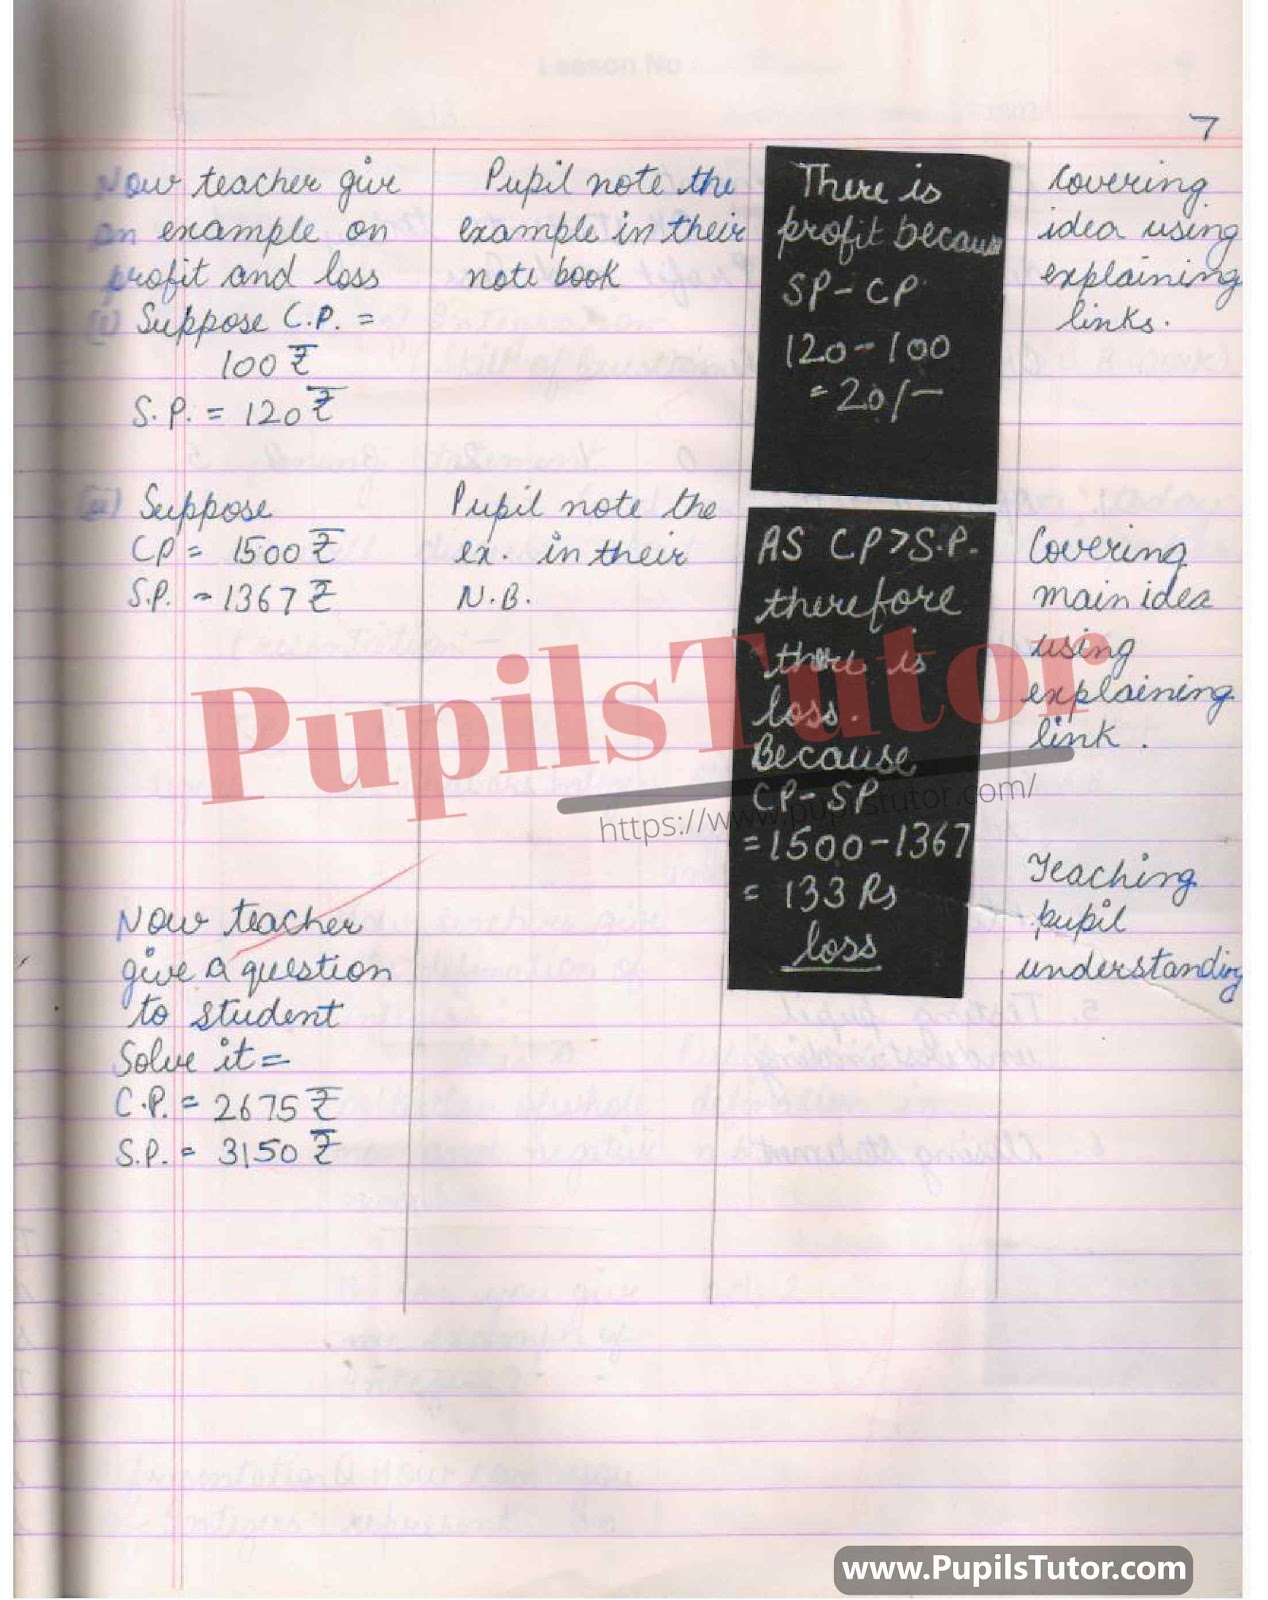 Class/Grade 7 Mathematics Lesson Plan On Profit And Loss Calculation And Formula For CBSE NCERT KVS School And University College Teachers – (Page And Image Number 3) – www.pupilstutor.com